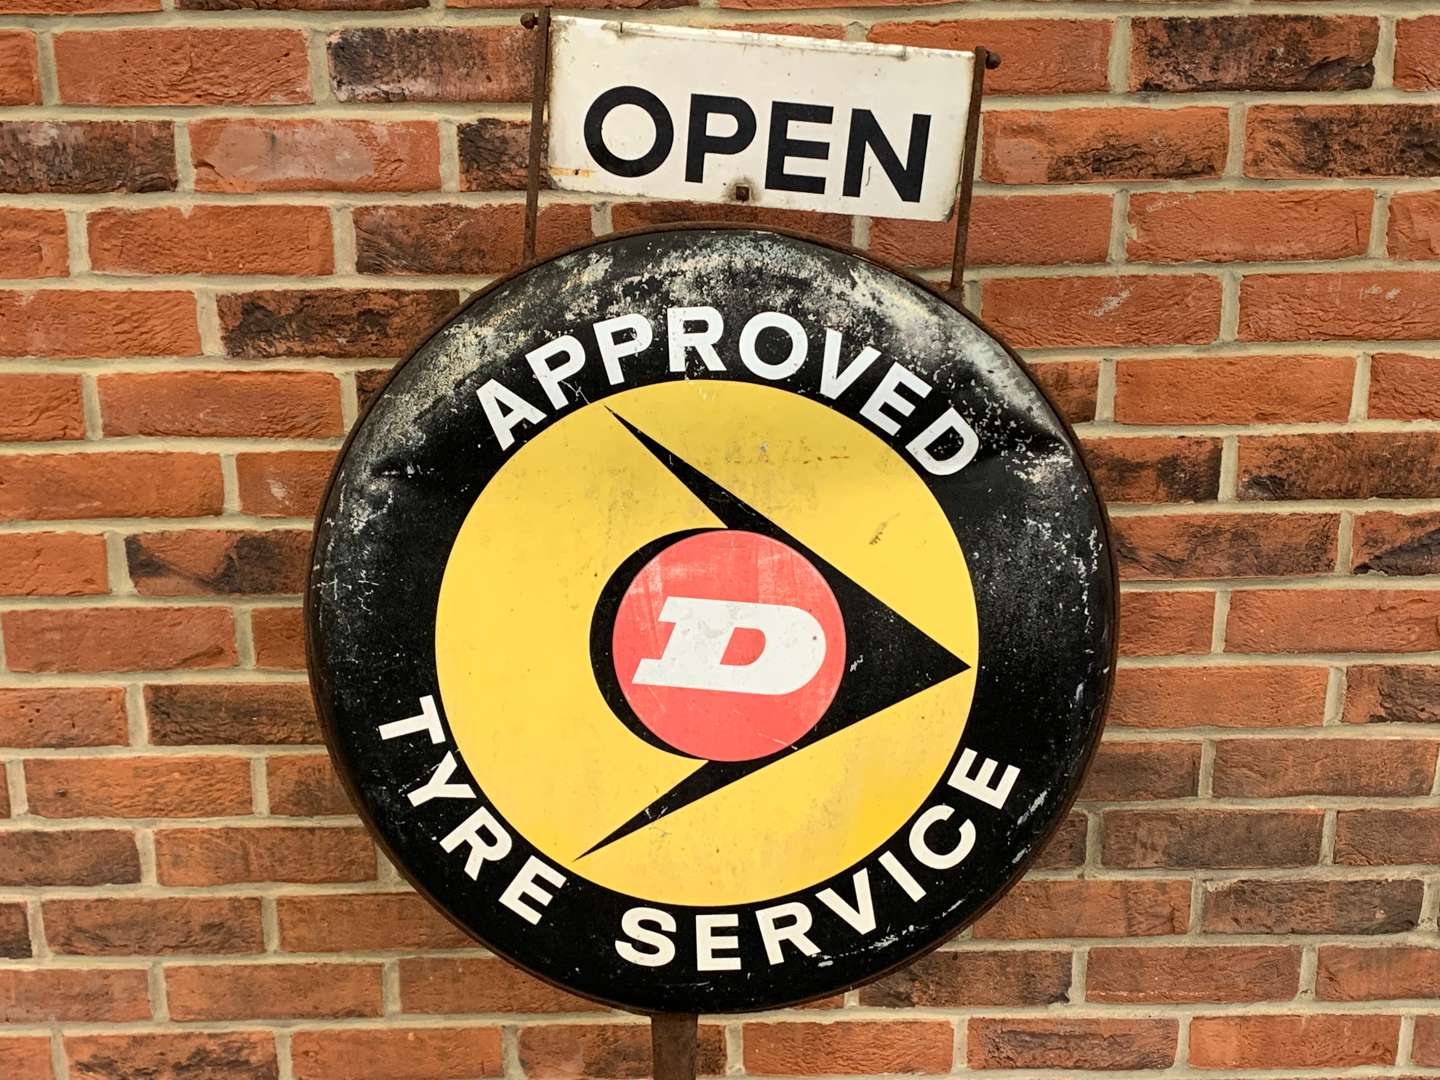 <p>Dunlop Approved Tyre's and Service Forecourt Sign</p>